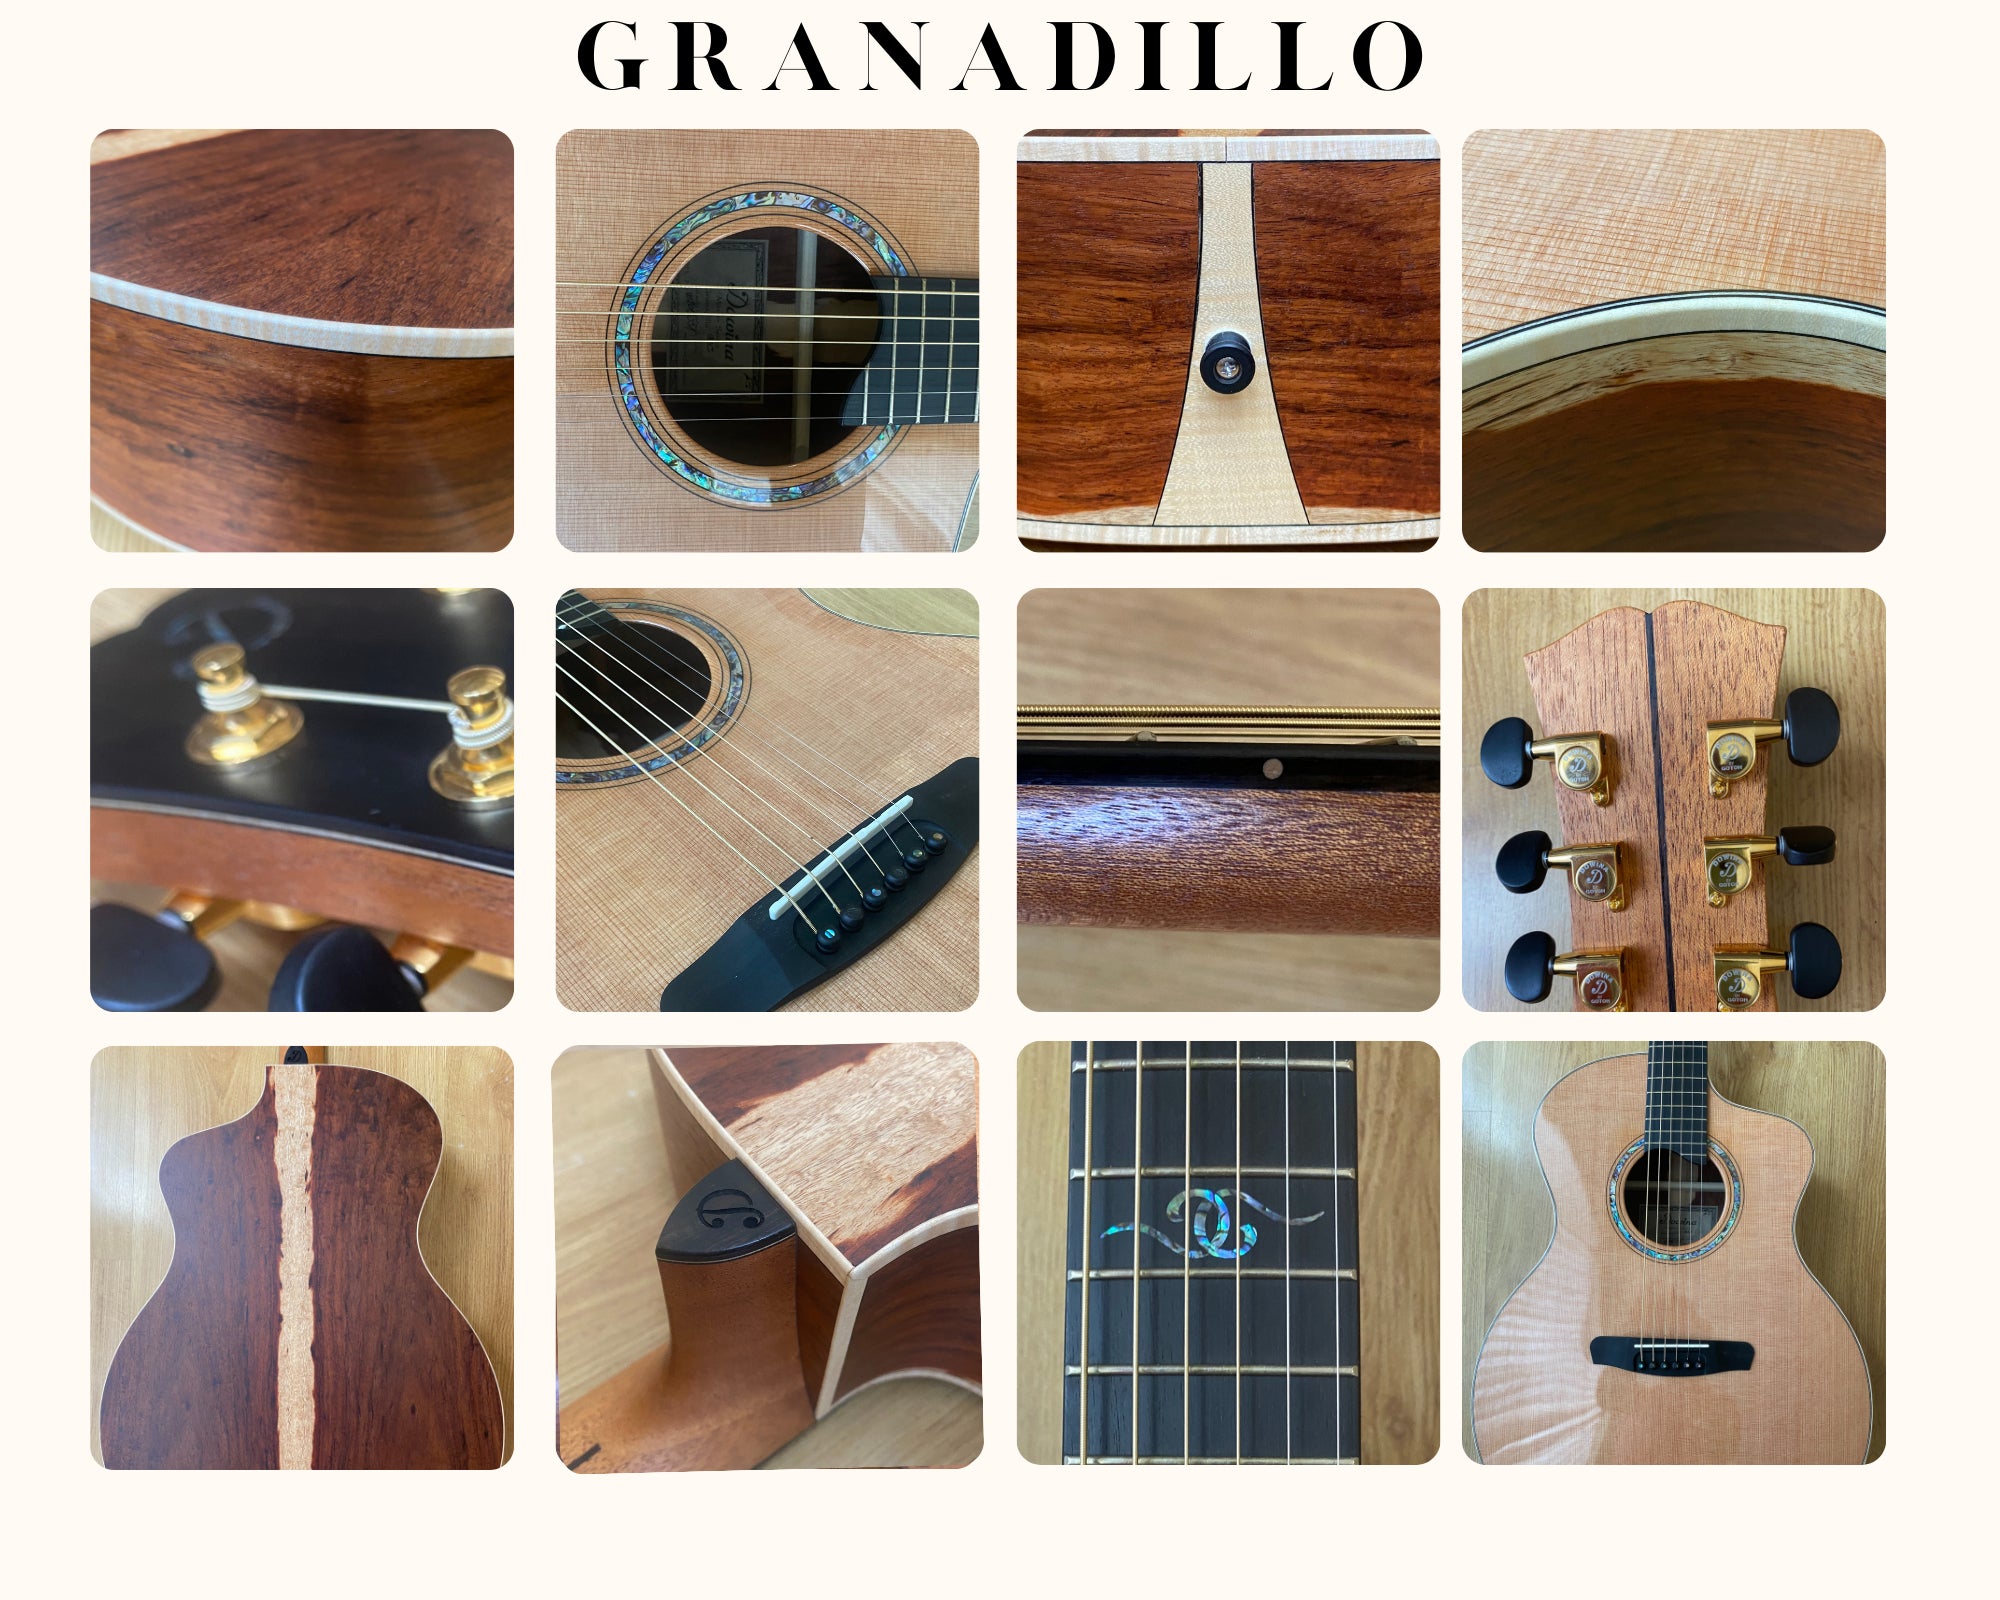 Dowina Granadillo HC Limited Edition.  Inc One Of Four Exclusive Backs!, Acoustic Guitar for sale at Richards Guitars.